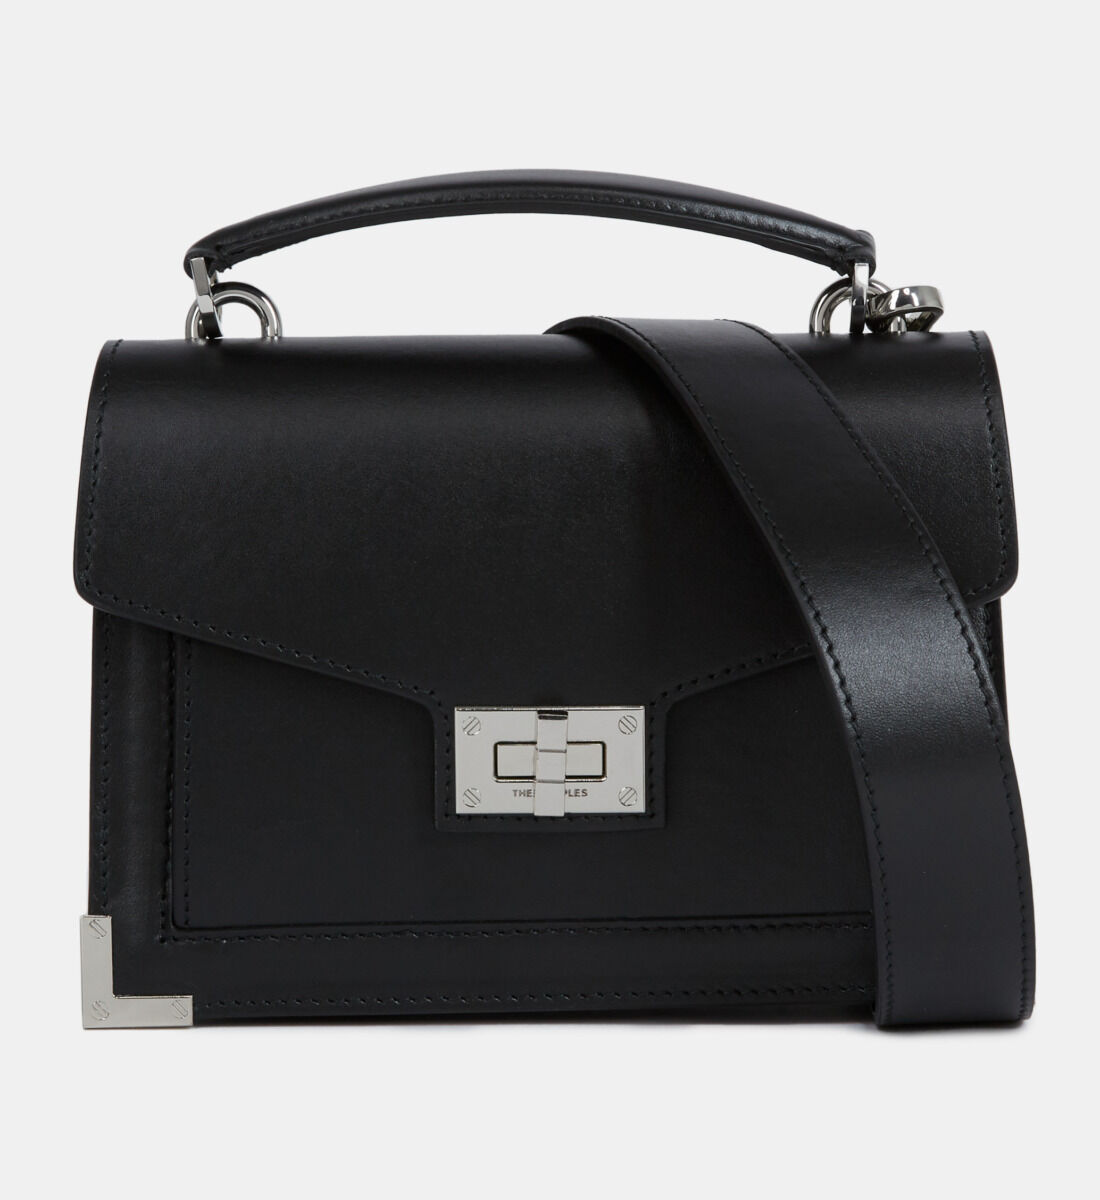 Jill black leather shopping bag with studs | The Kooples